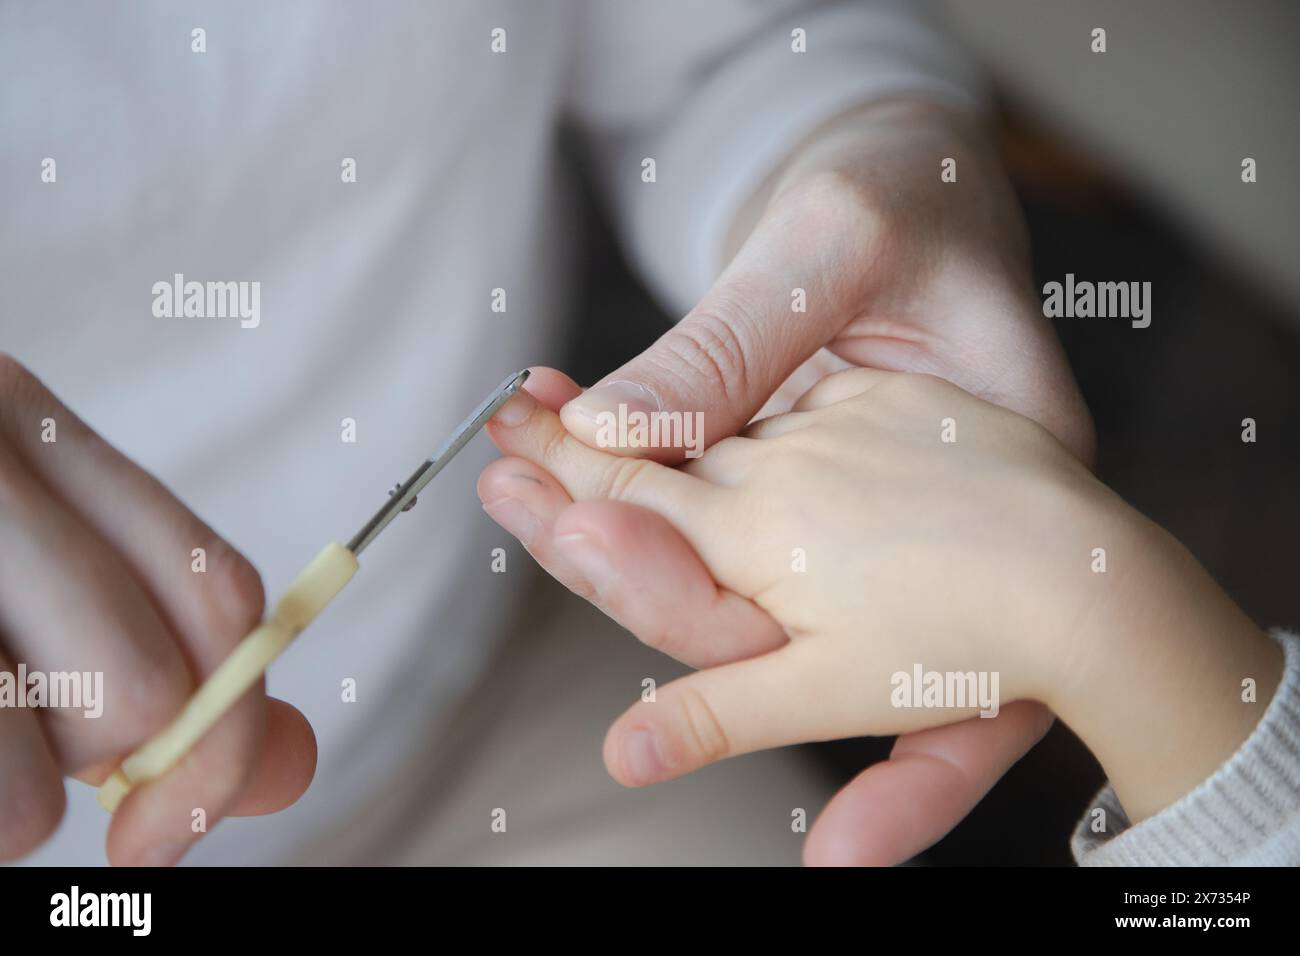 Close-up of an adult carefully trimming a child's fingernails, highlighting a tender moment of care and grooming. Stock Photo